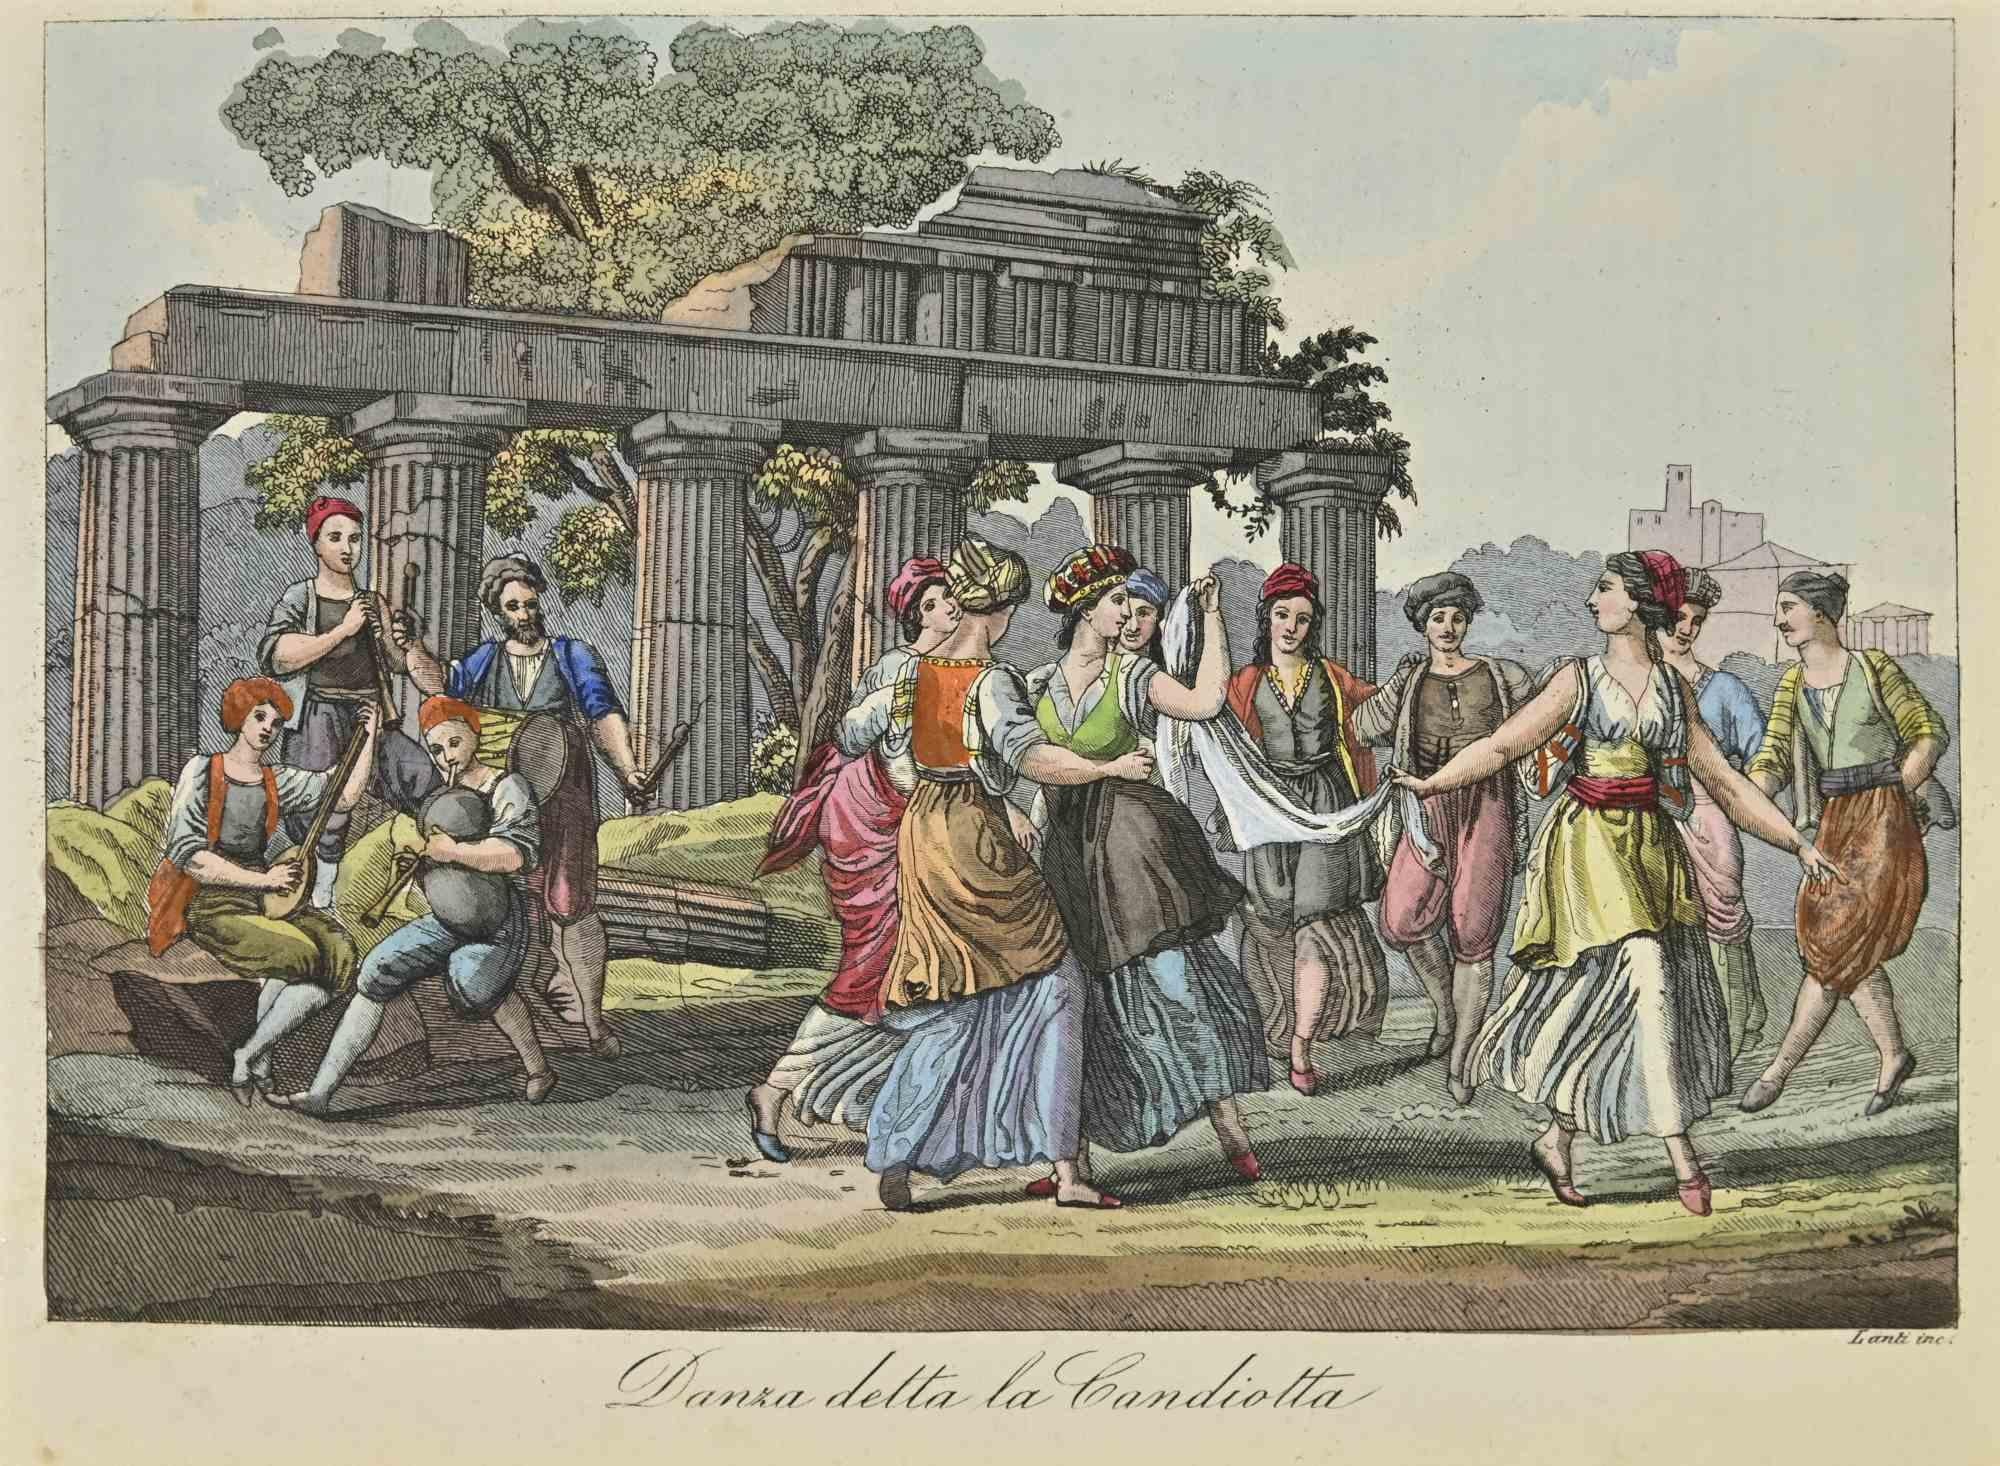 Unknown Landscape Print - Dance called the Candiotta - Lithograph - 1862